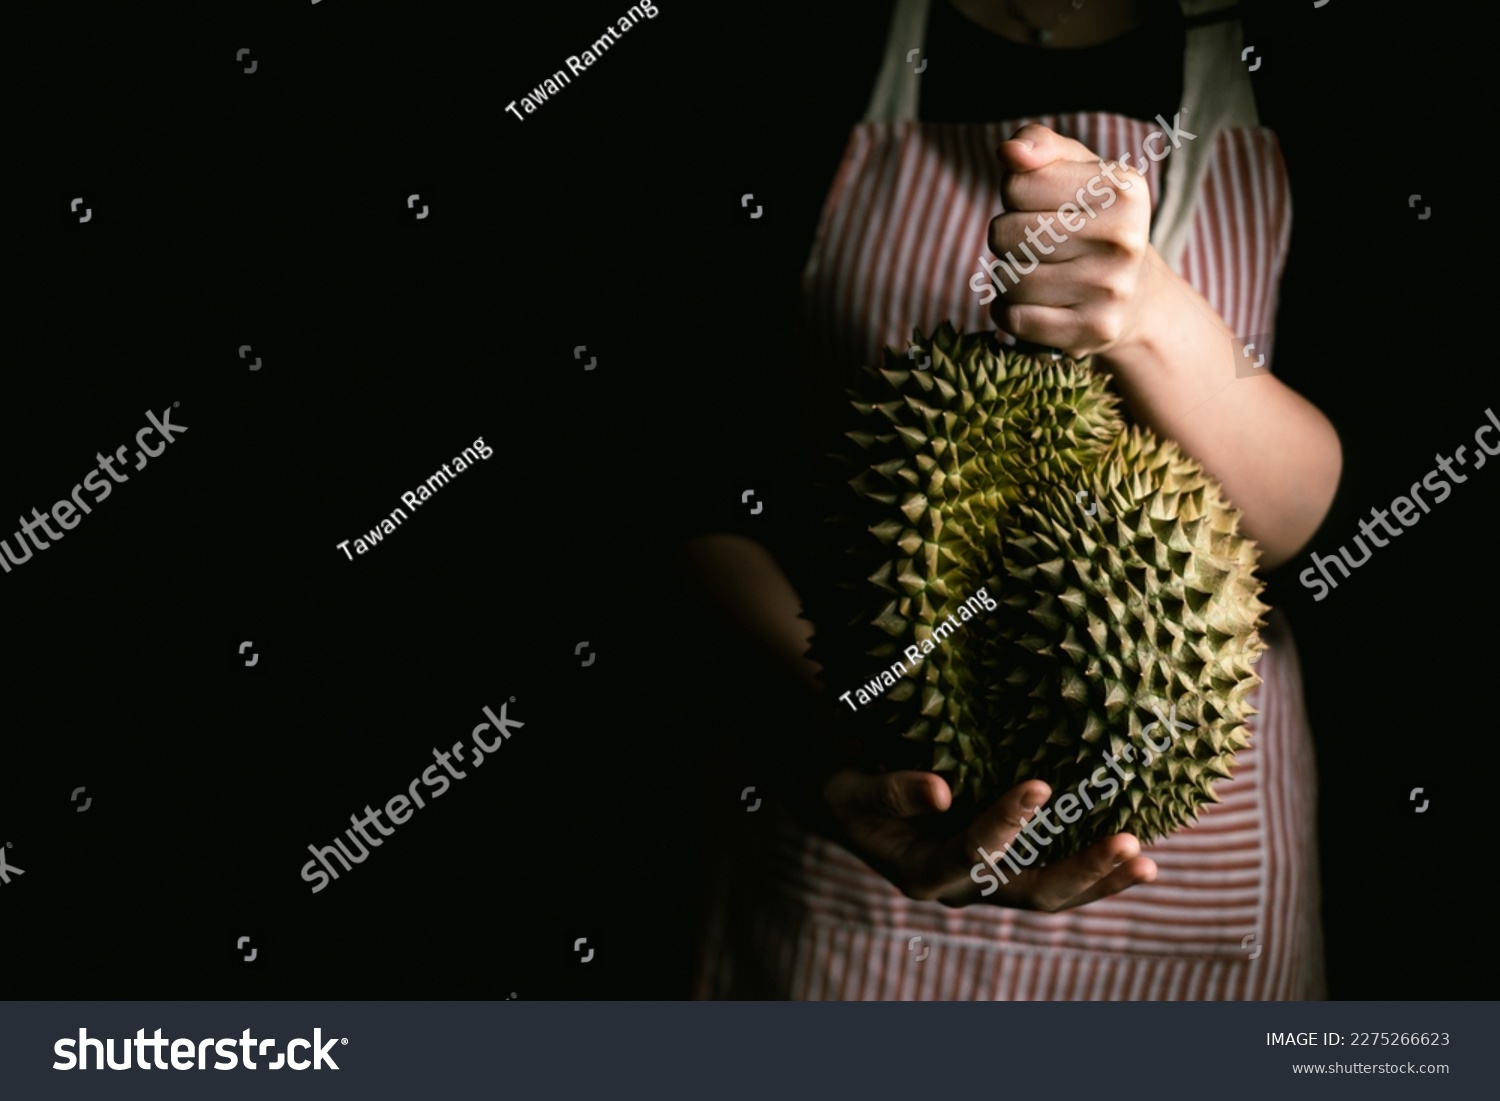 Farmer hand holding Ripe durian the king of tropical fruits. #2275266623